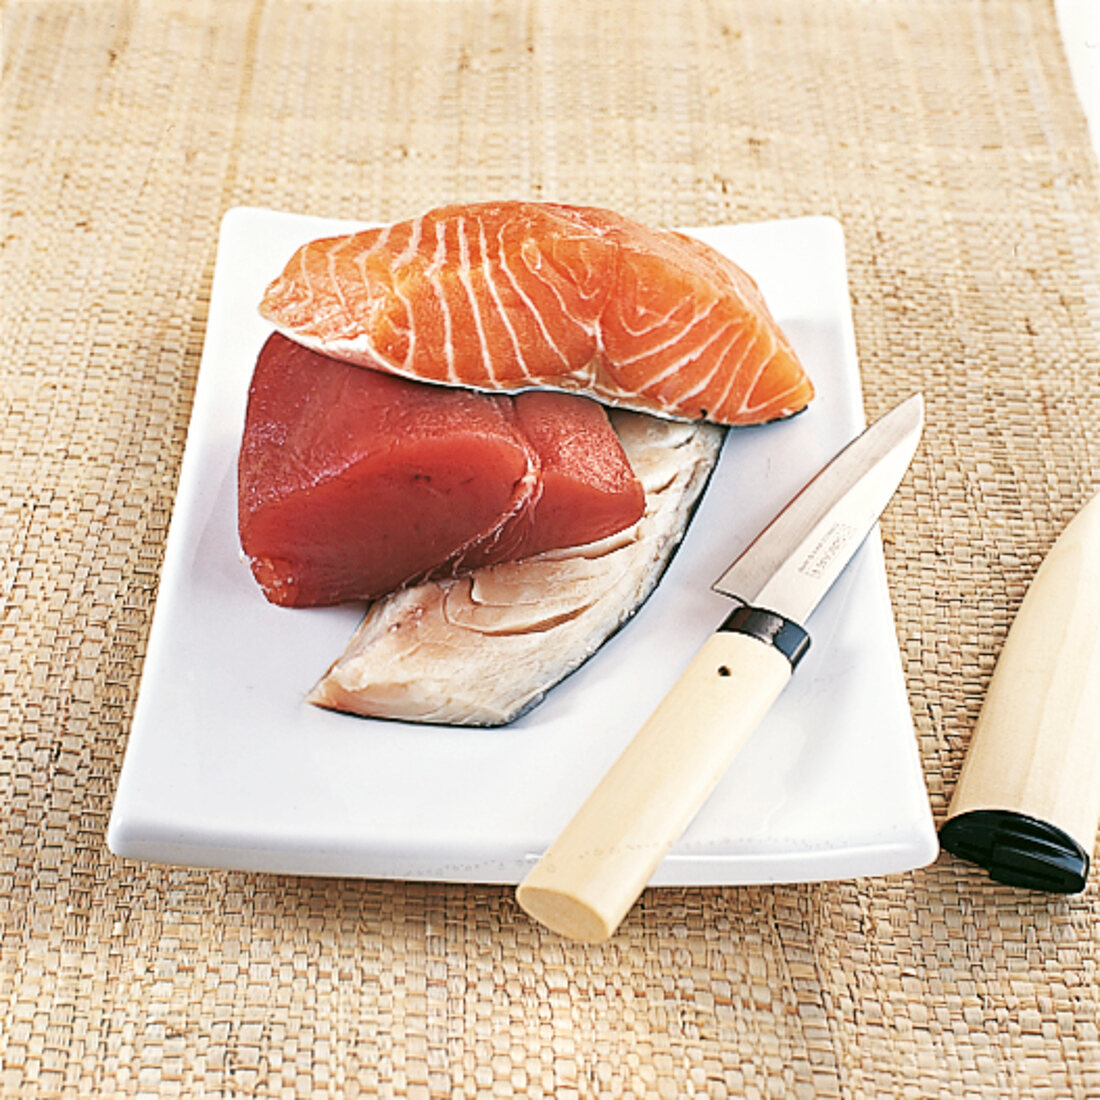 Three species of raw fish on porcelain plate with knife